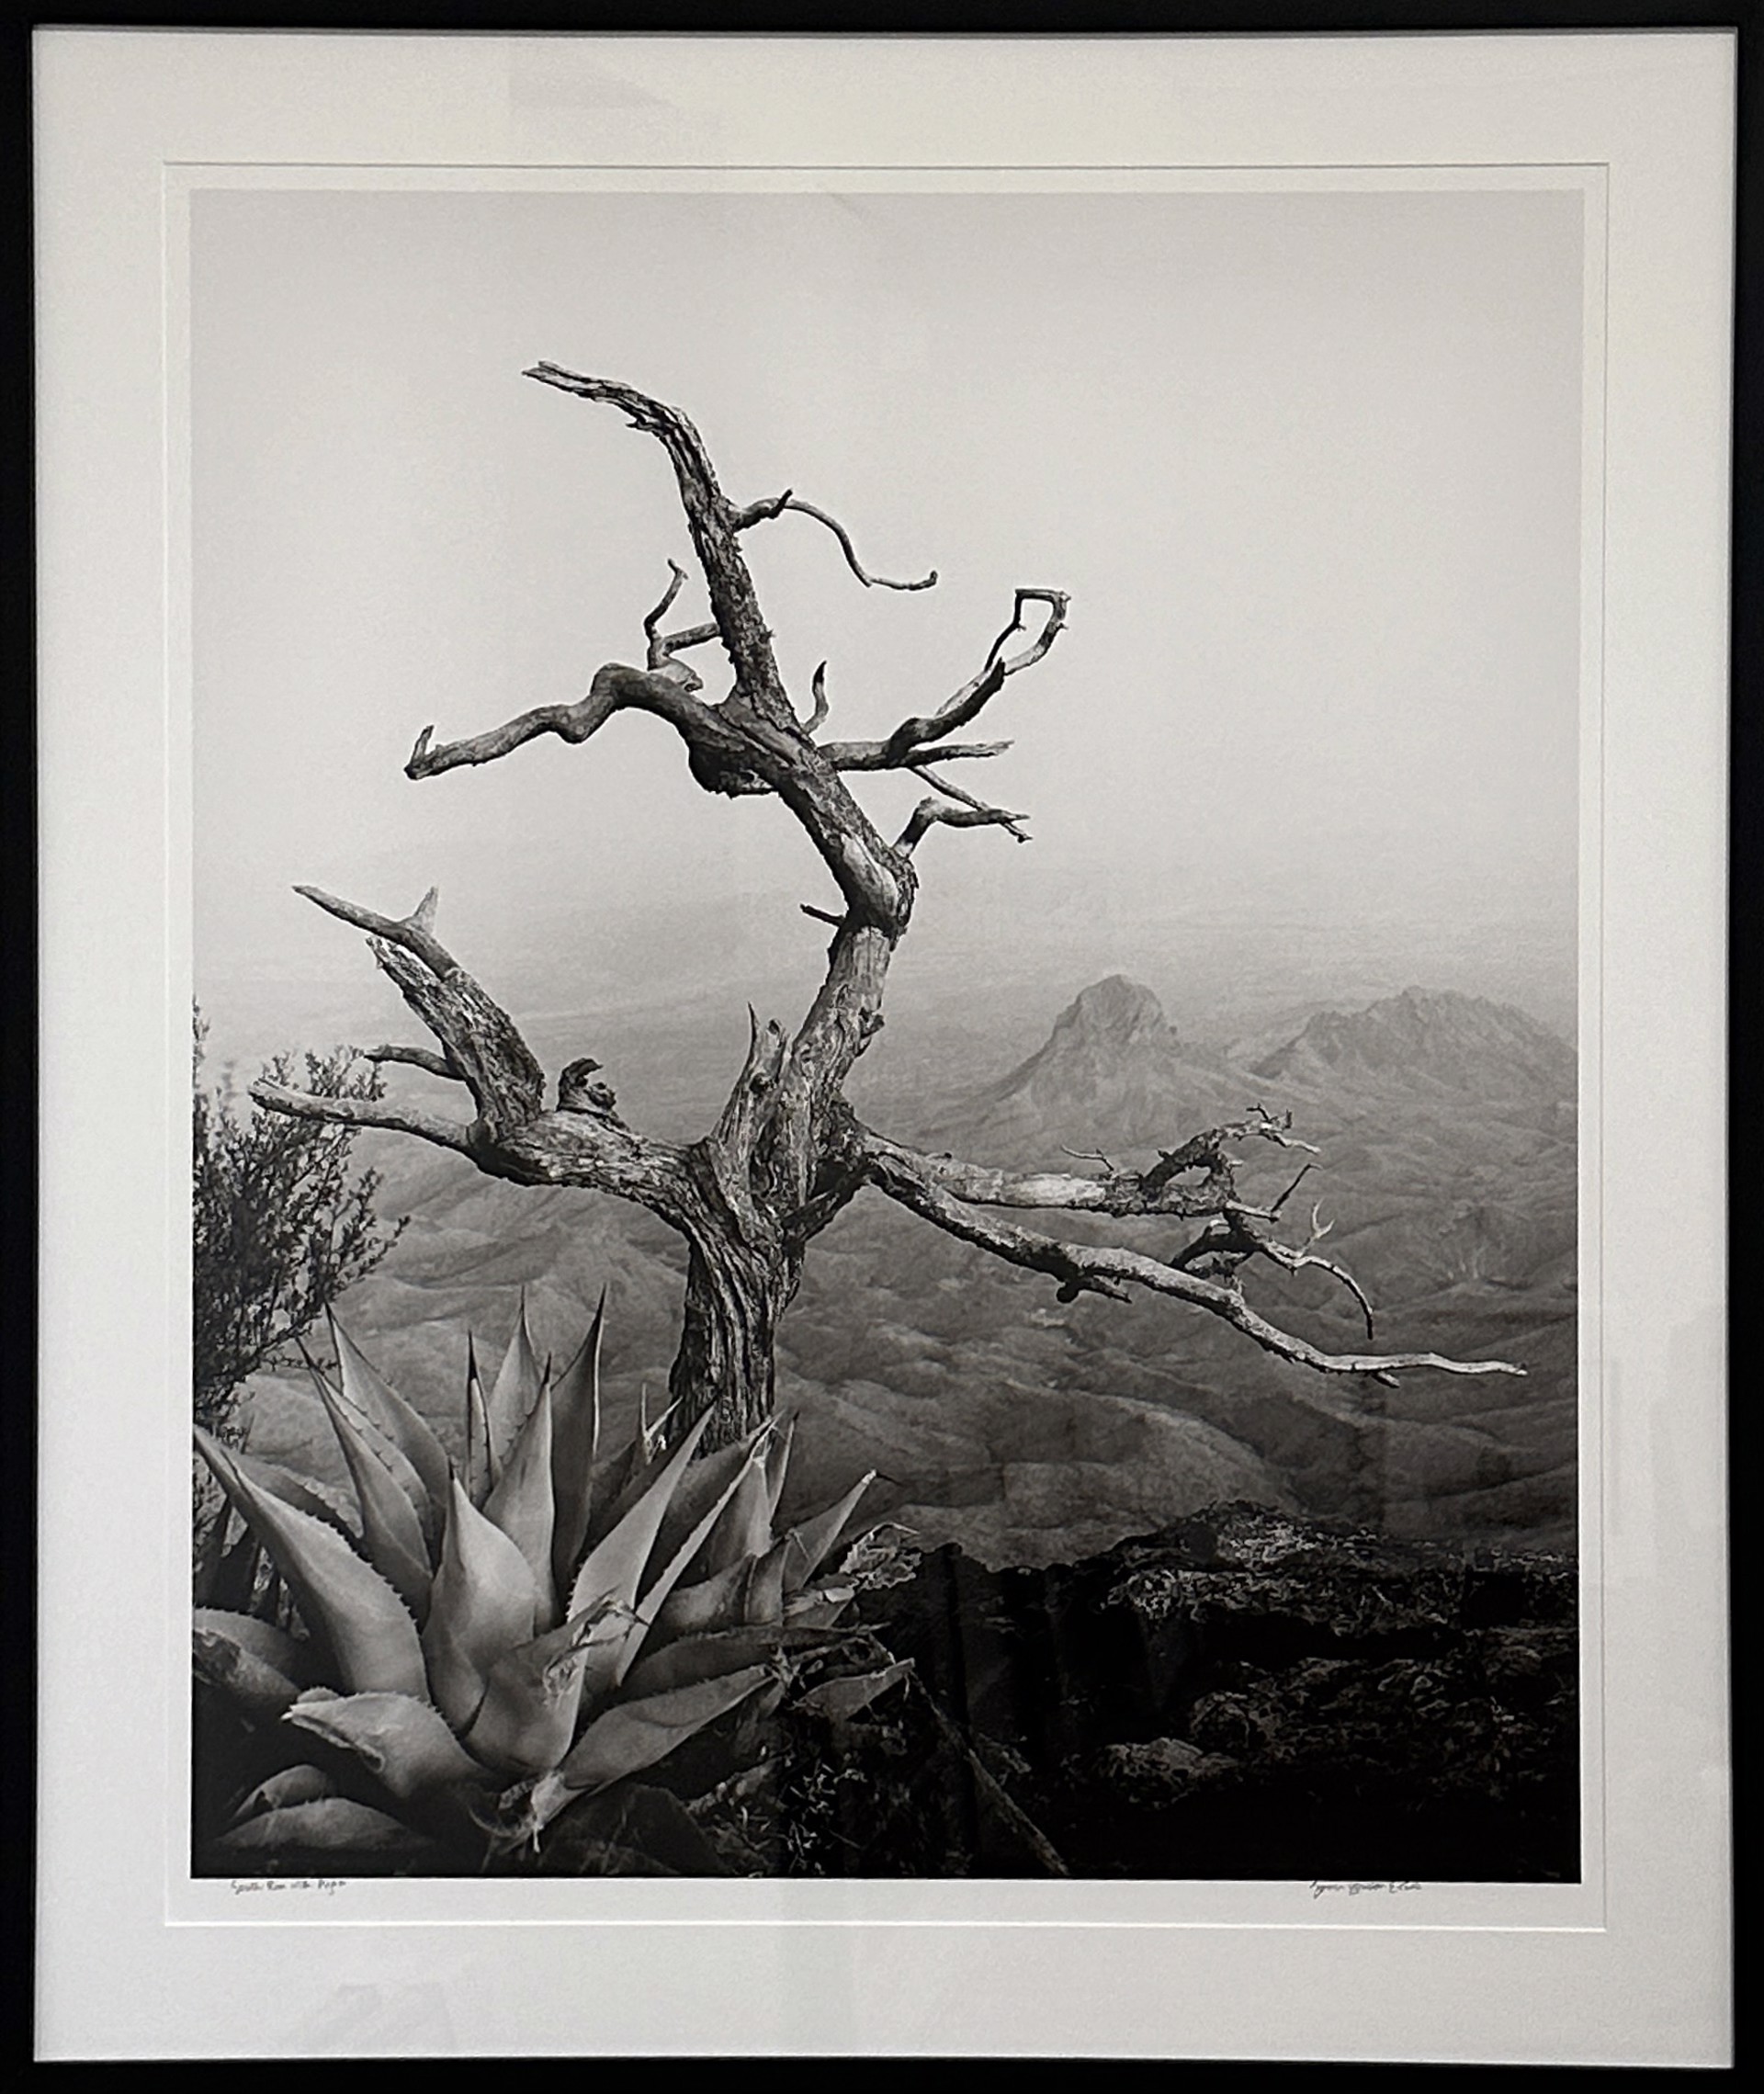 South Rim with Agave by James H. Evans